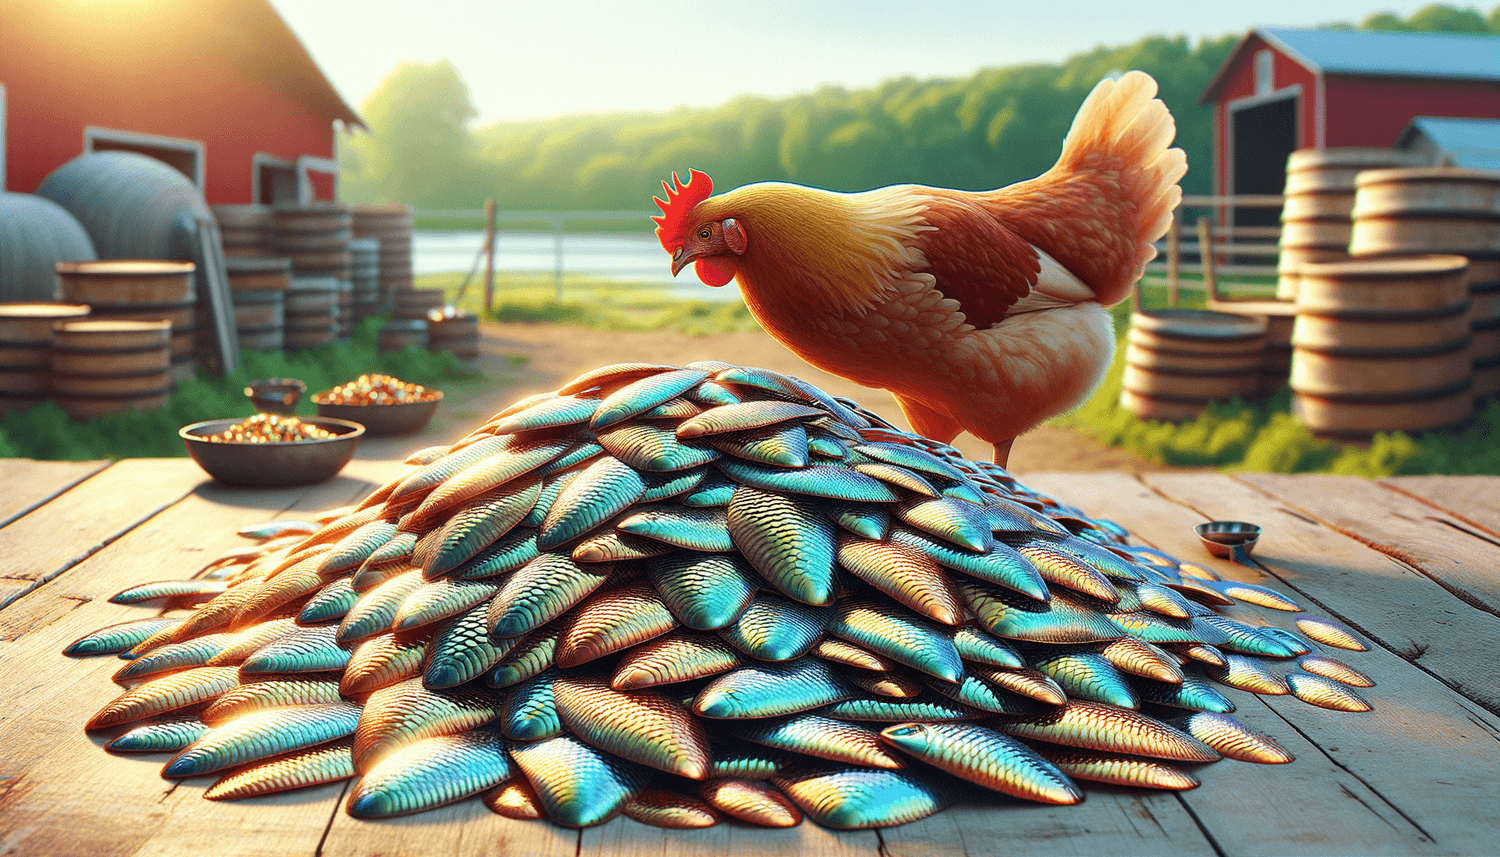 Can Chickens Eat Fish Scales?